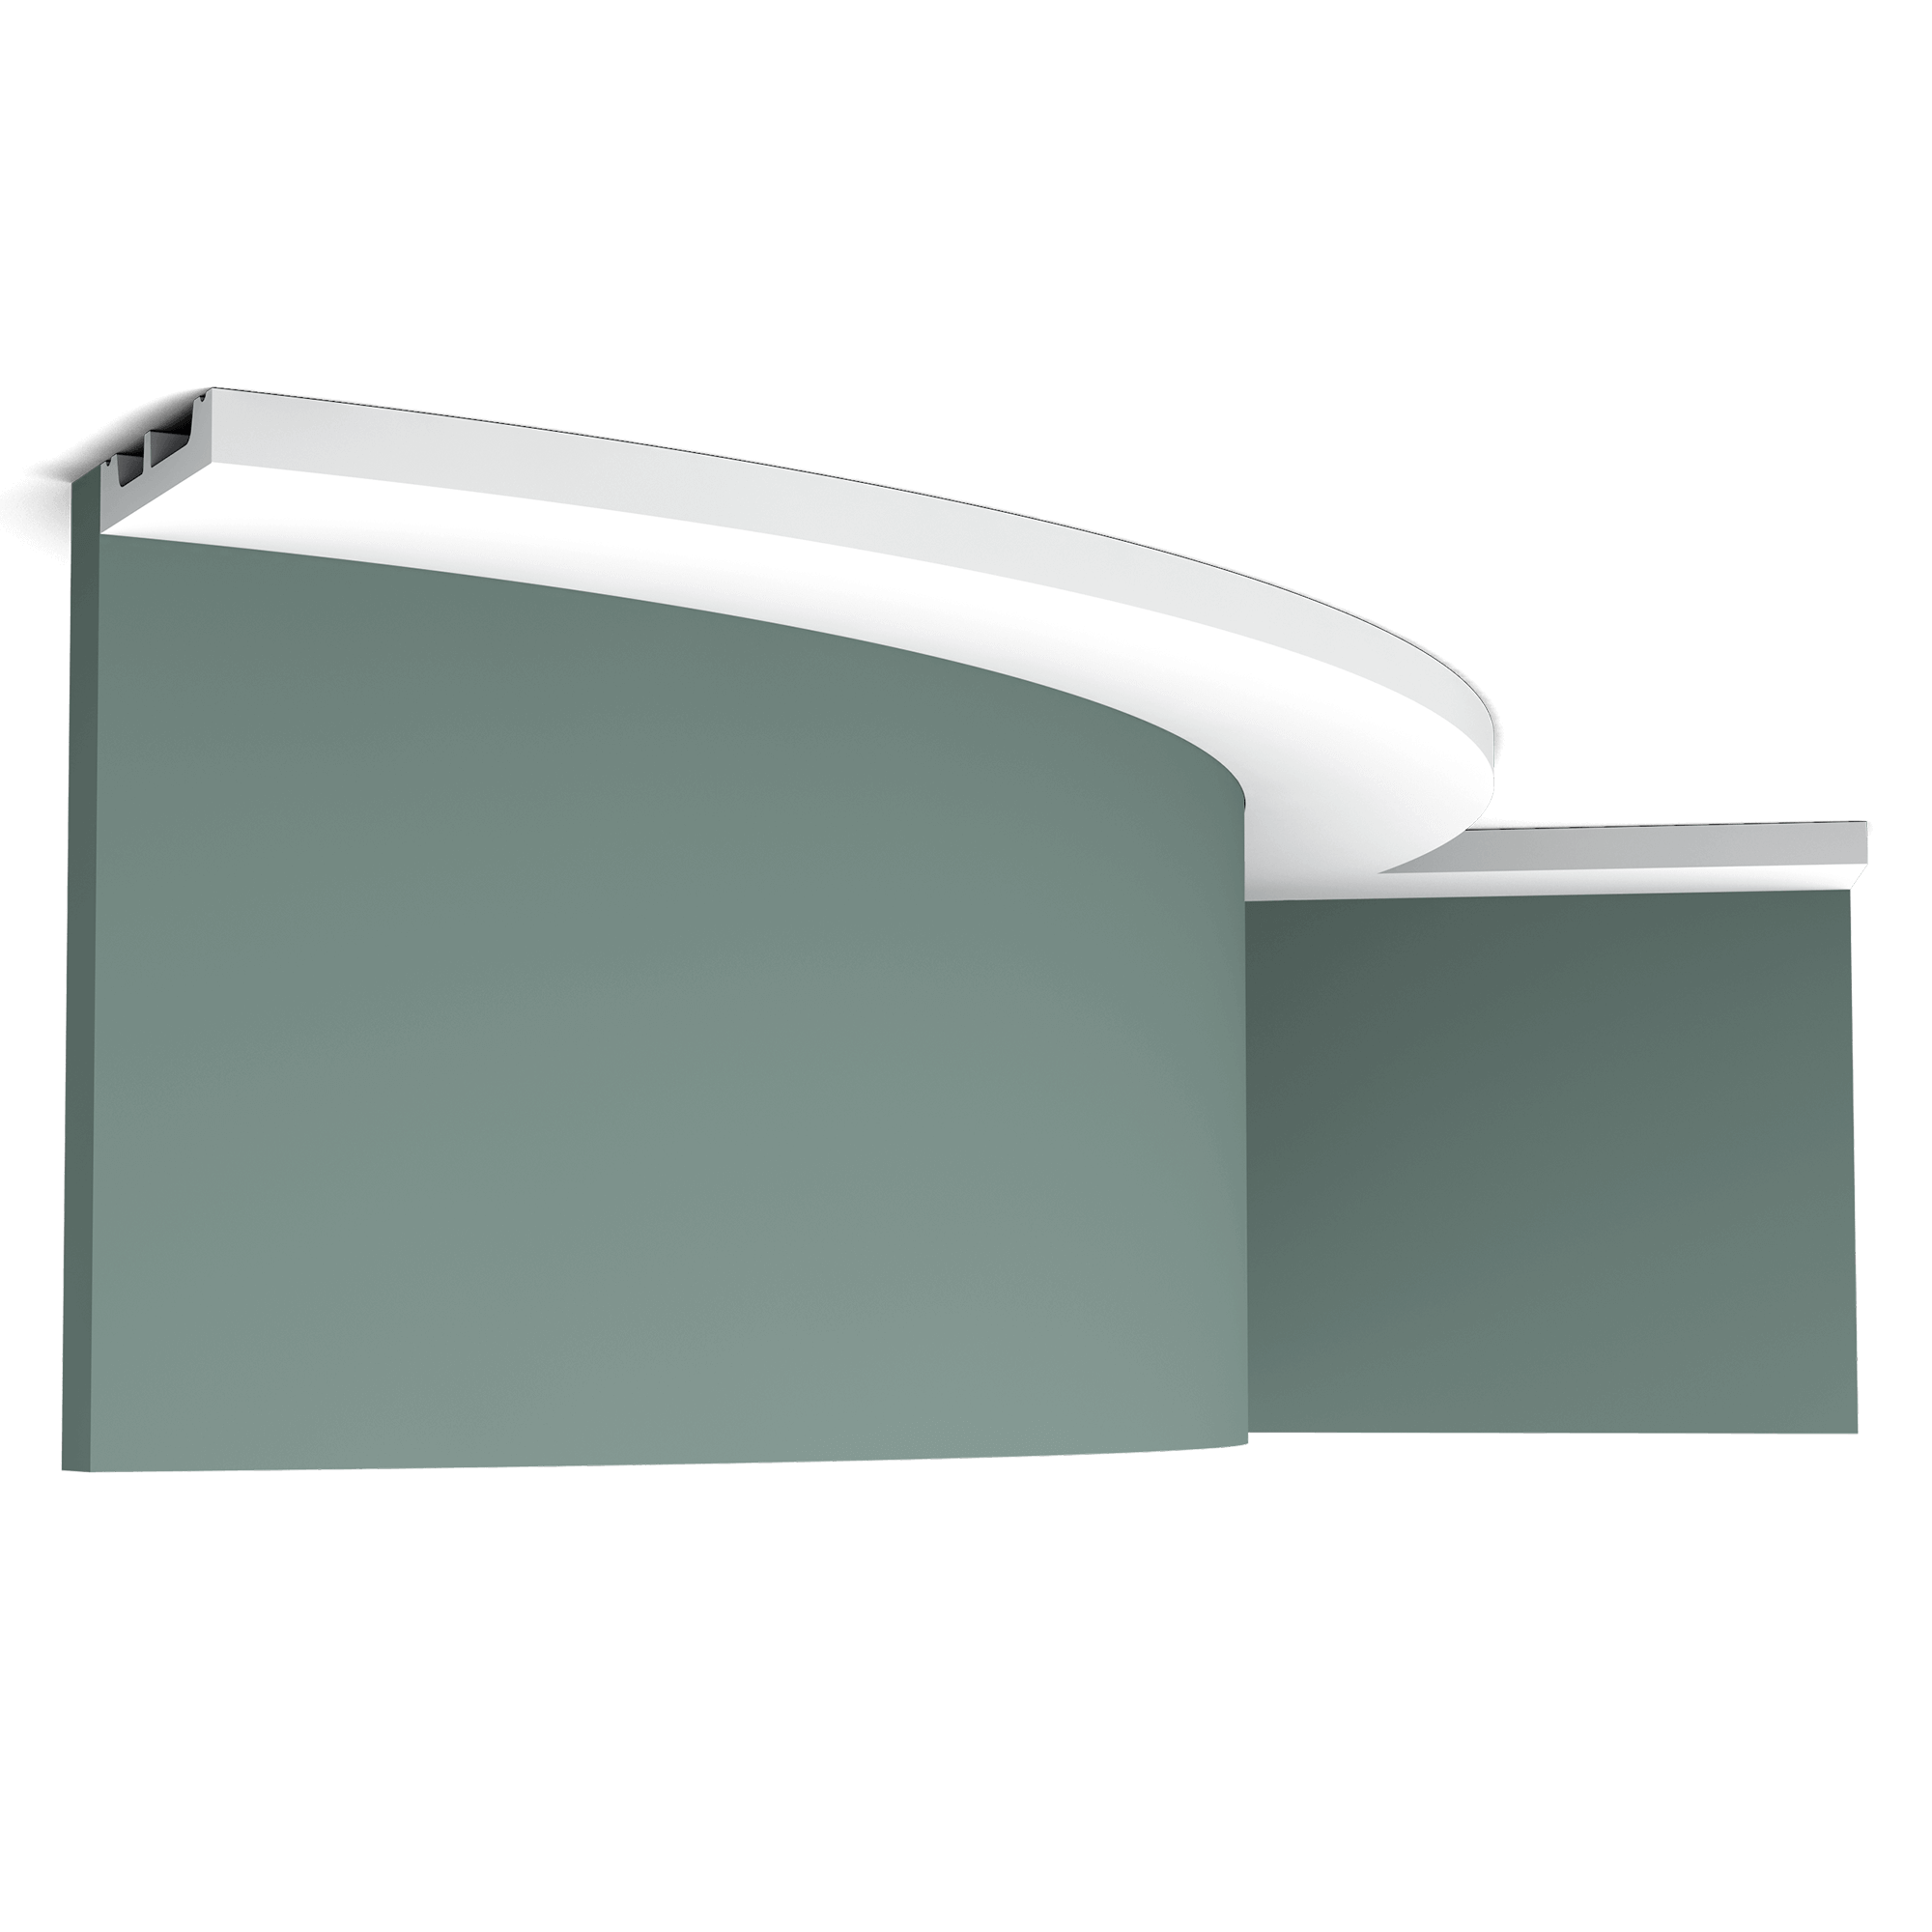 Flexible version of the SX157. Our simplest cornice moulding is part of the SQUARE family. Thanks to its Flex technology, curved walls and surfaces are no problem. Installation remark: It is necessary to screw this profile on the wall. Flex Radius: R min = 35 cm, R* min = 260 cm